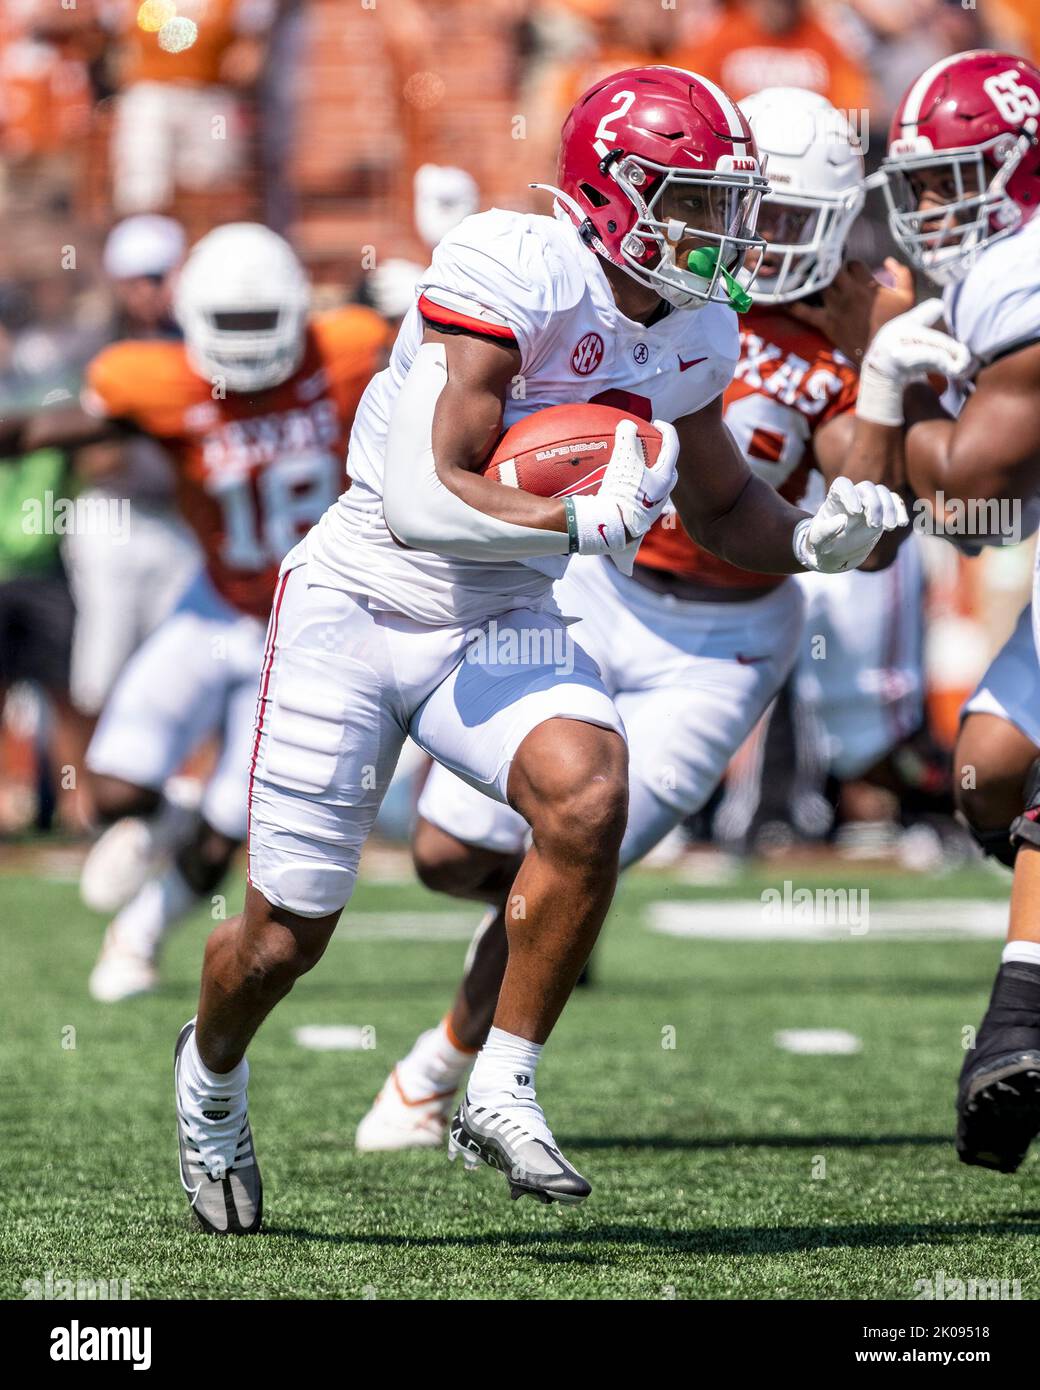 September 10, 2022. Jase McClellan #2 of the Alabama Crimson Tide in action vs the Texas Longhorns at DKR-Memorial Stadium. Texas and Alabama are tied 10-10 at the half. Stock Photo